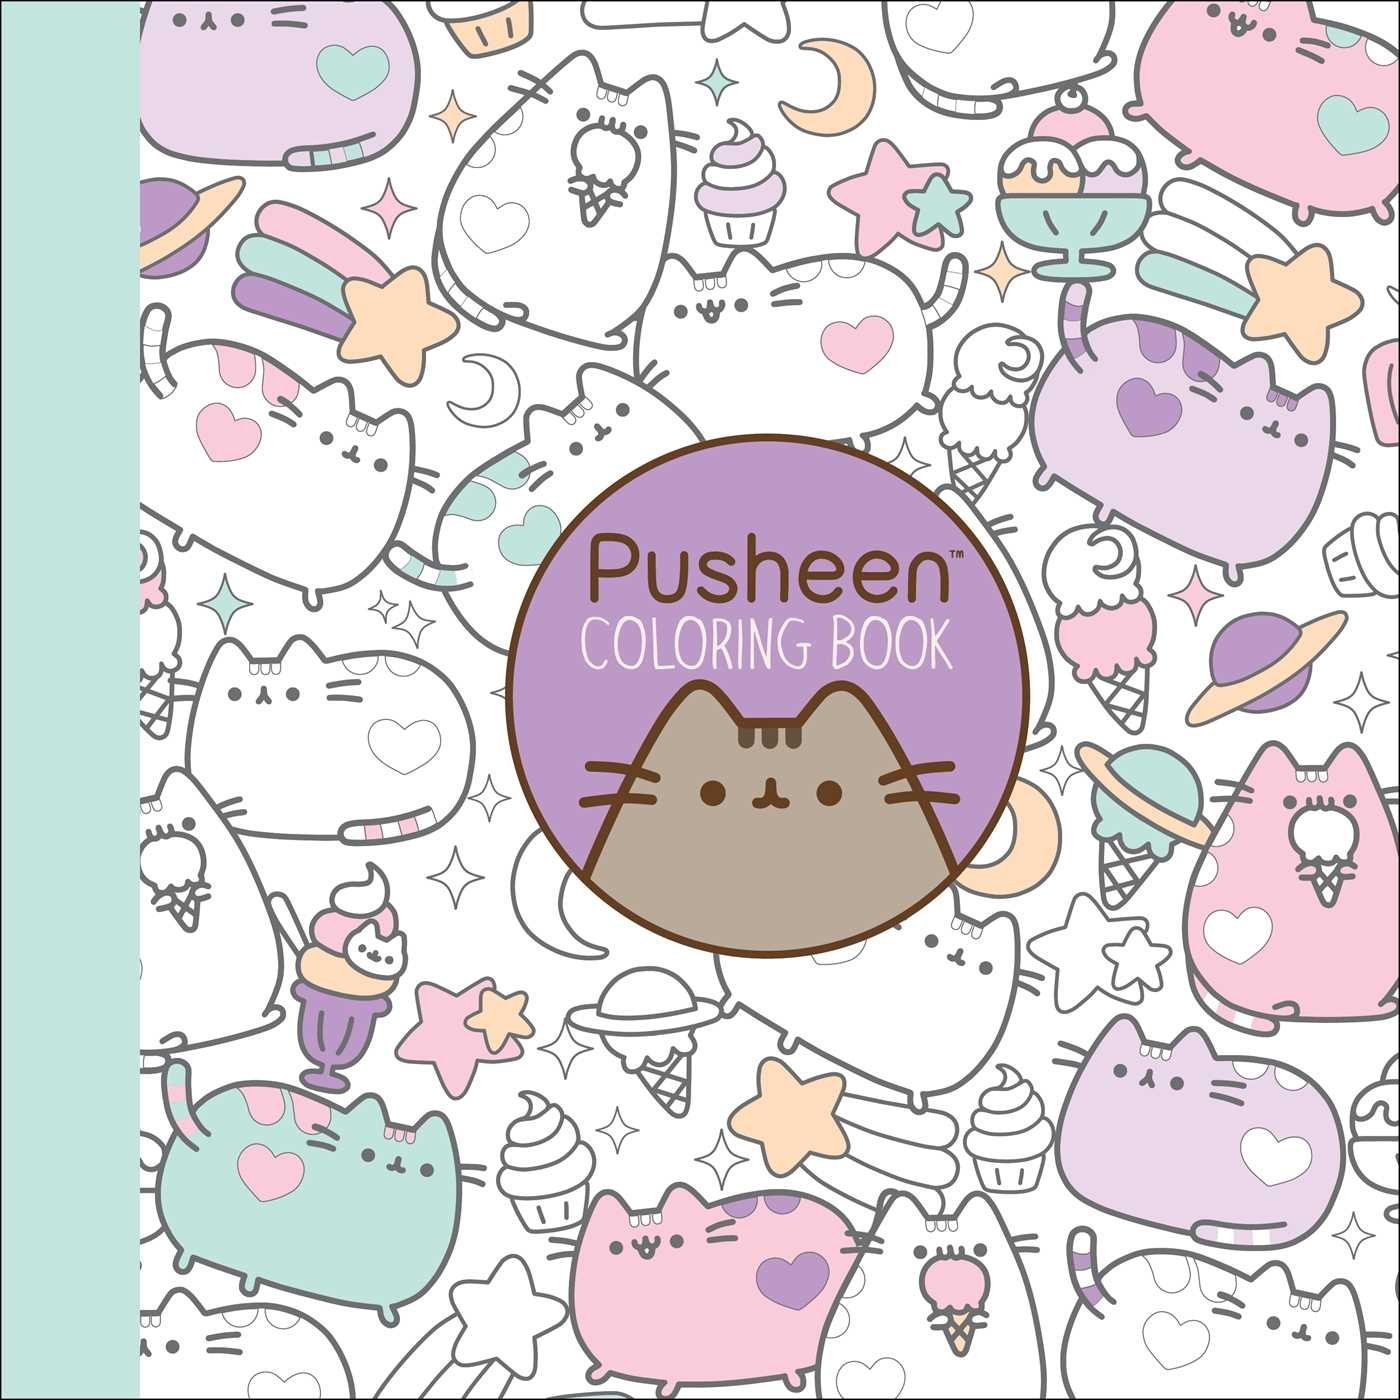 Pusheen's first coloring book features adorable kitty drawings and mandalas.